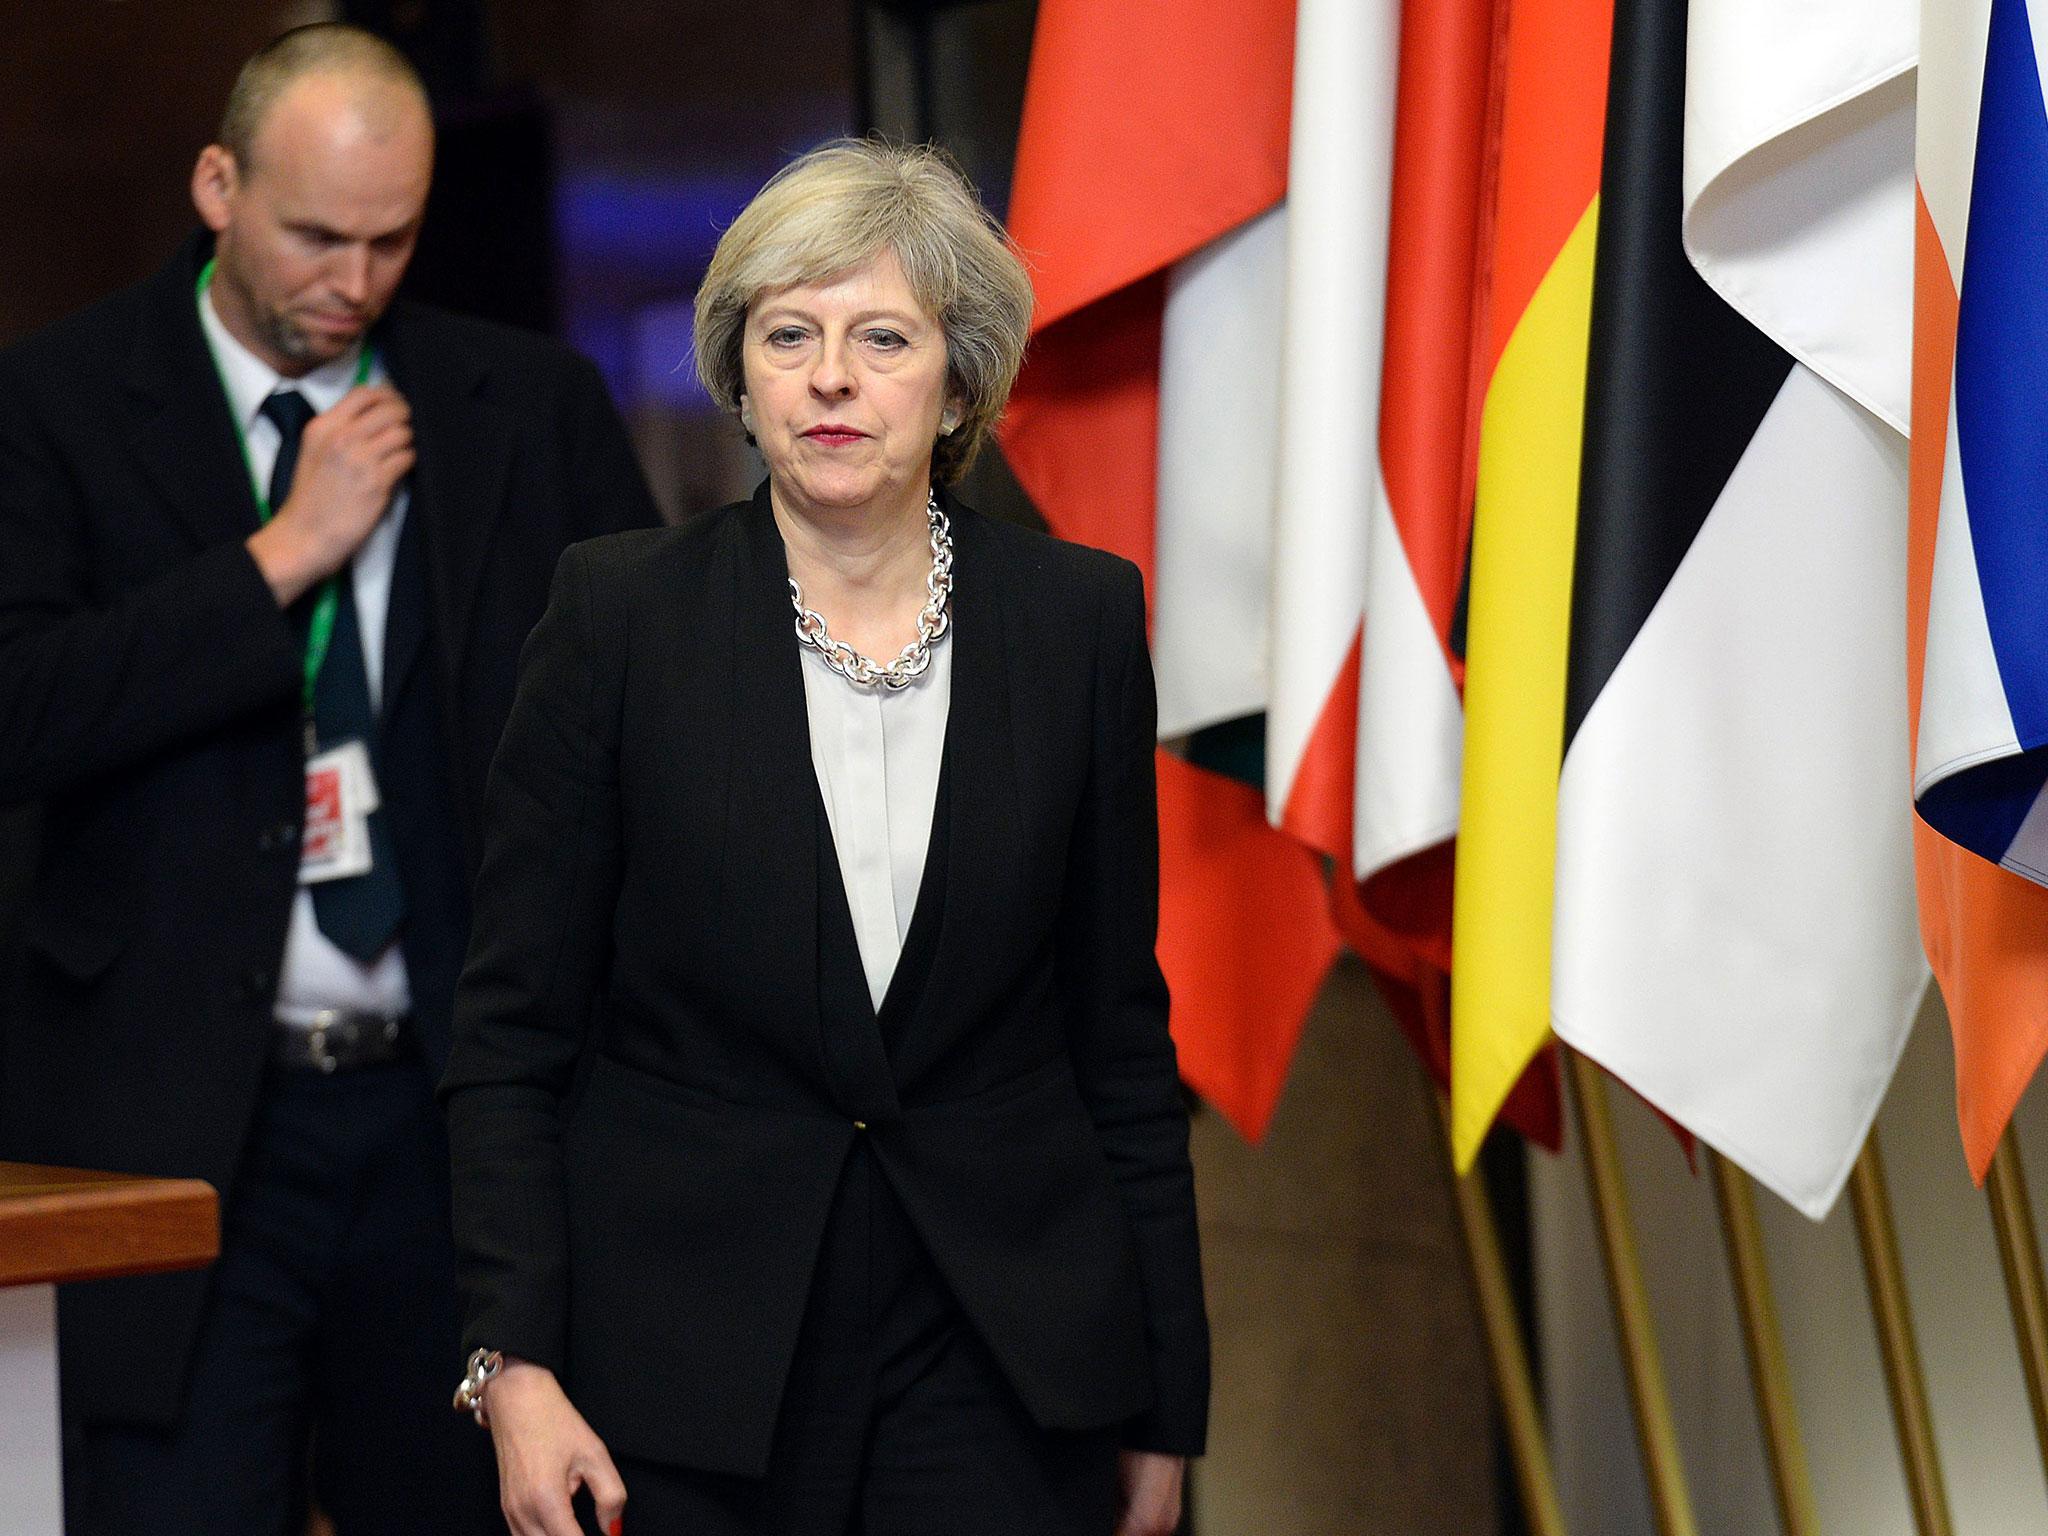 British Prime Minister Theresa May leaves at the end of a European Union Summit held at the EU Council building in Brussels on December 15, 2016. EU leaders agreed to extend for another six months damaging economic sanctions imposed on Russia for its role in the Ukraine crisis, diplomatic sources said